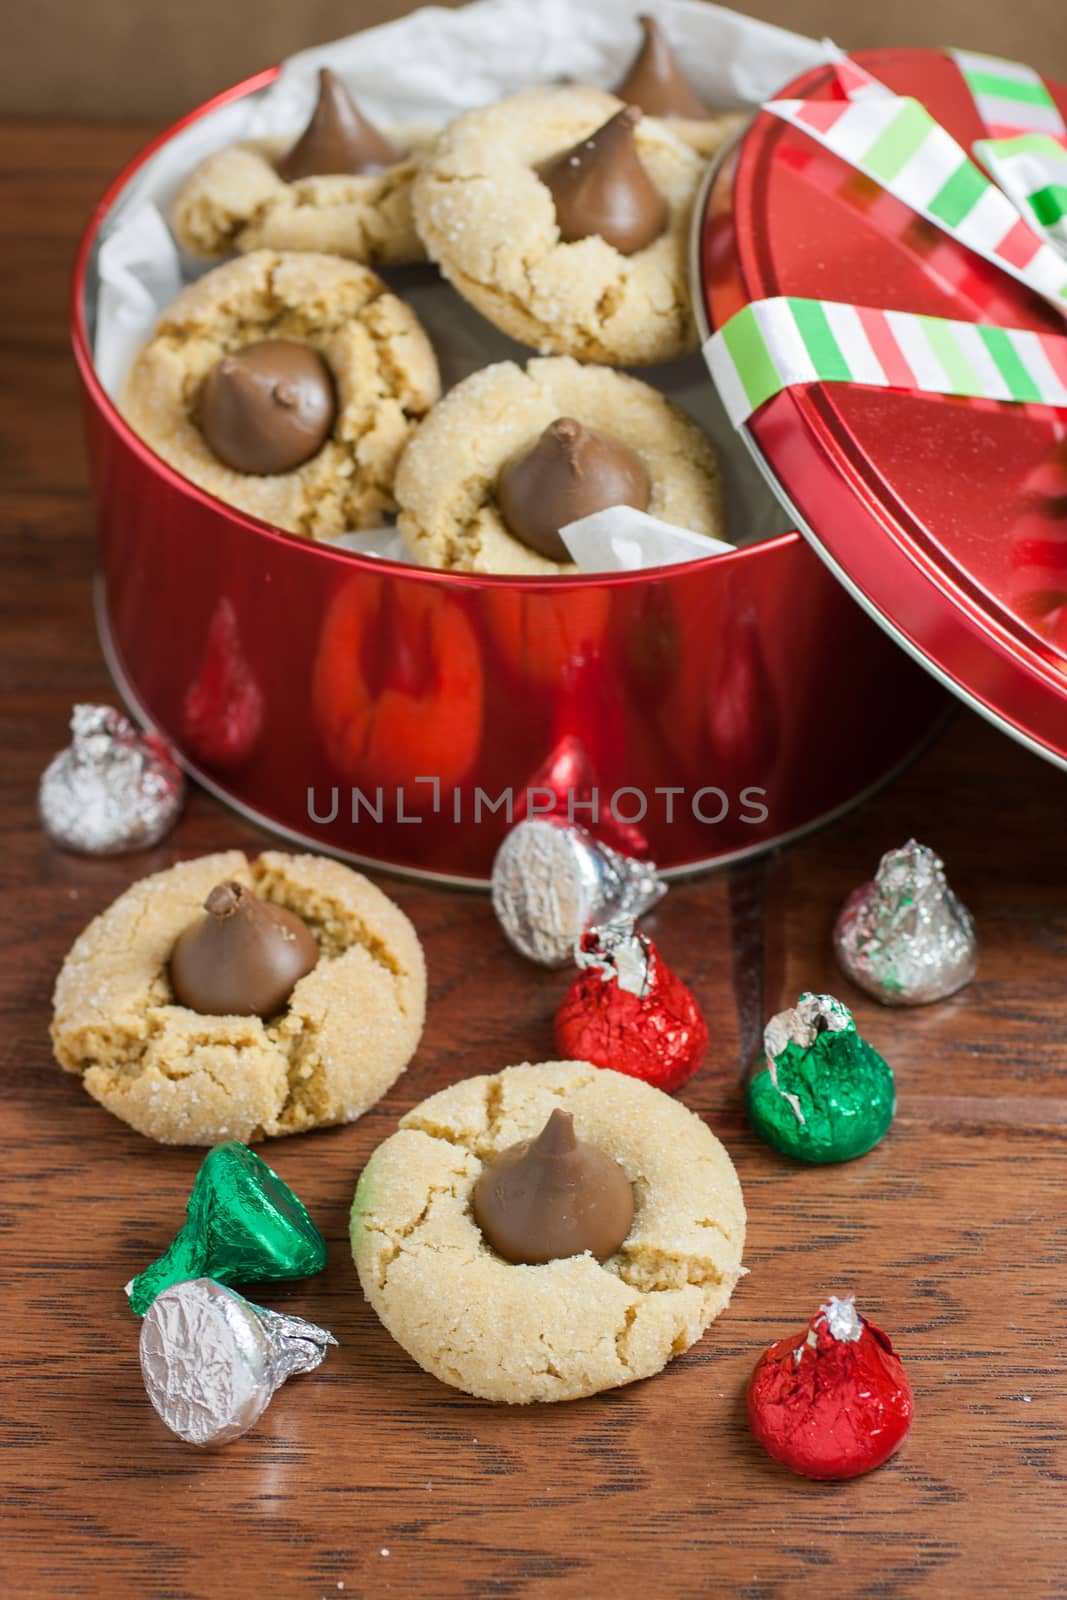 Peanut Butter Blossom Cookies by SouthernLightStudios